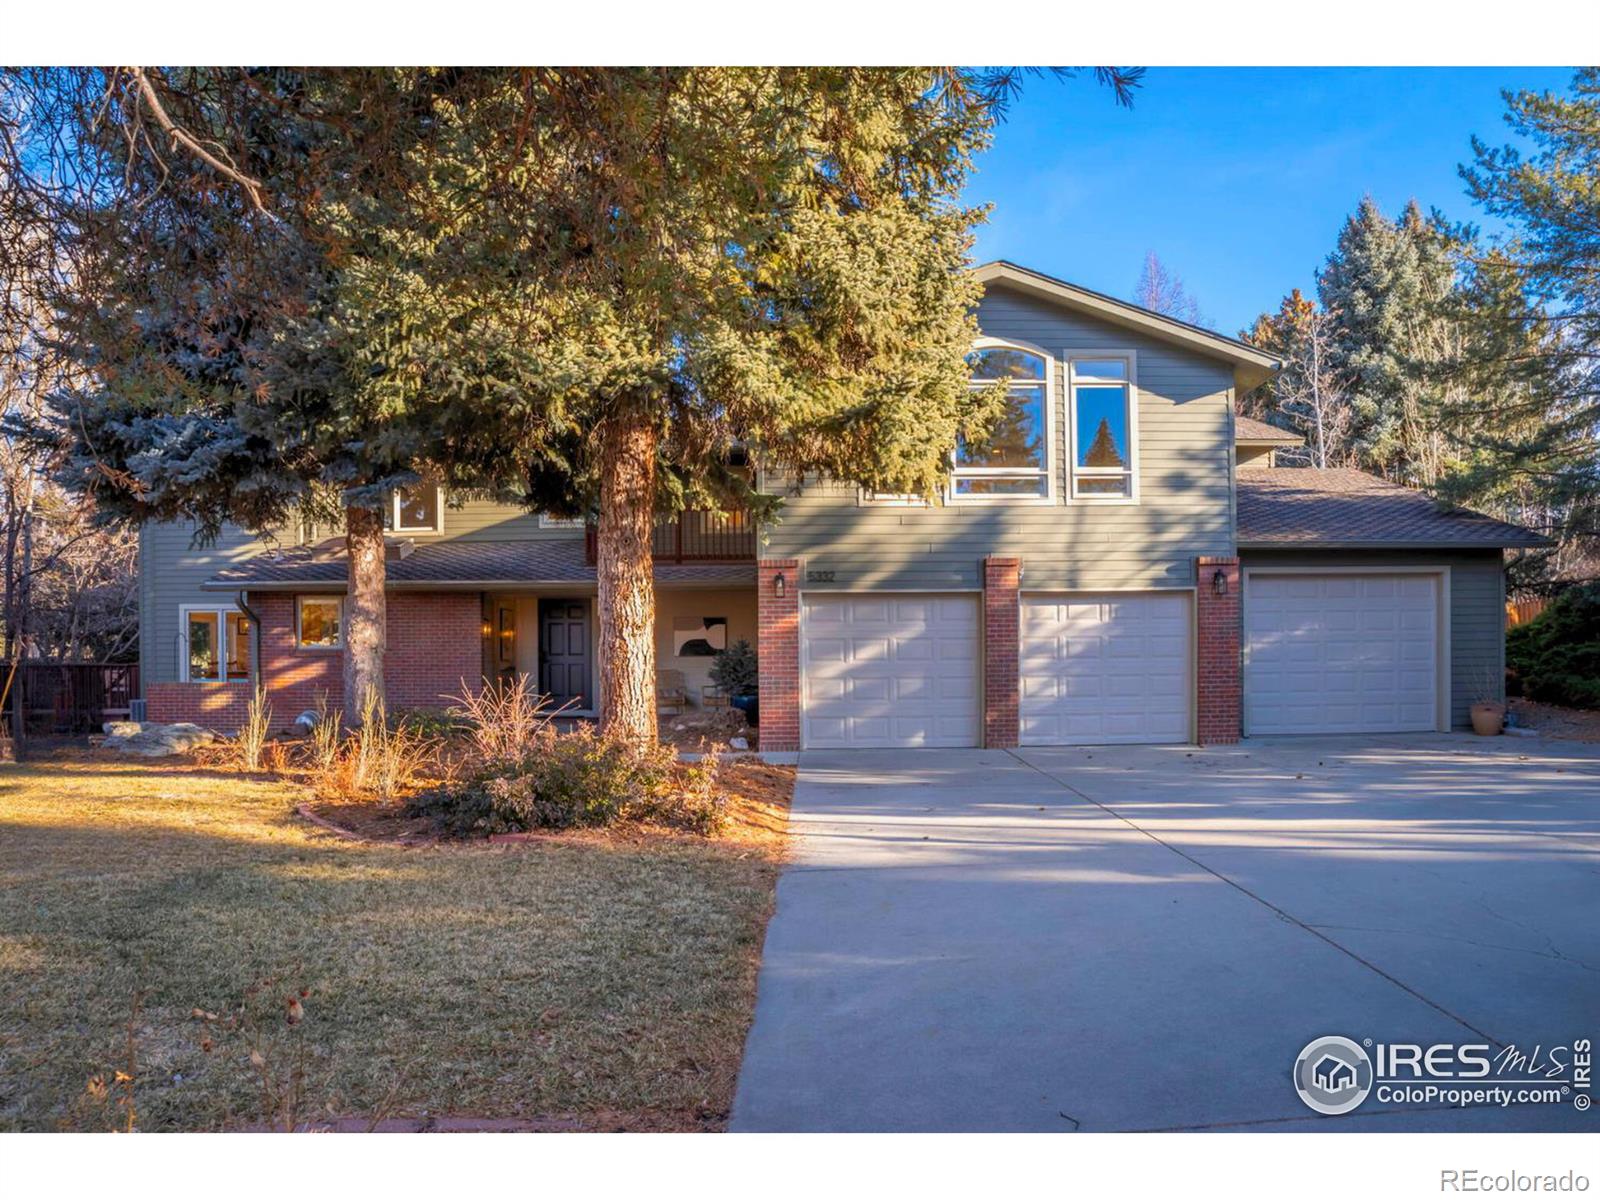 5332  spotted horse trail, boulder sold home. Closed on 2024-02-27 for $1,525,000.